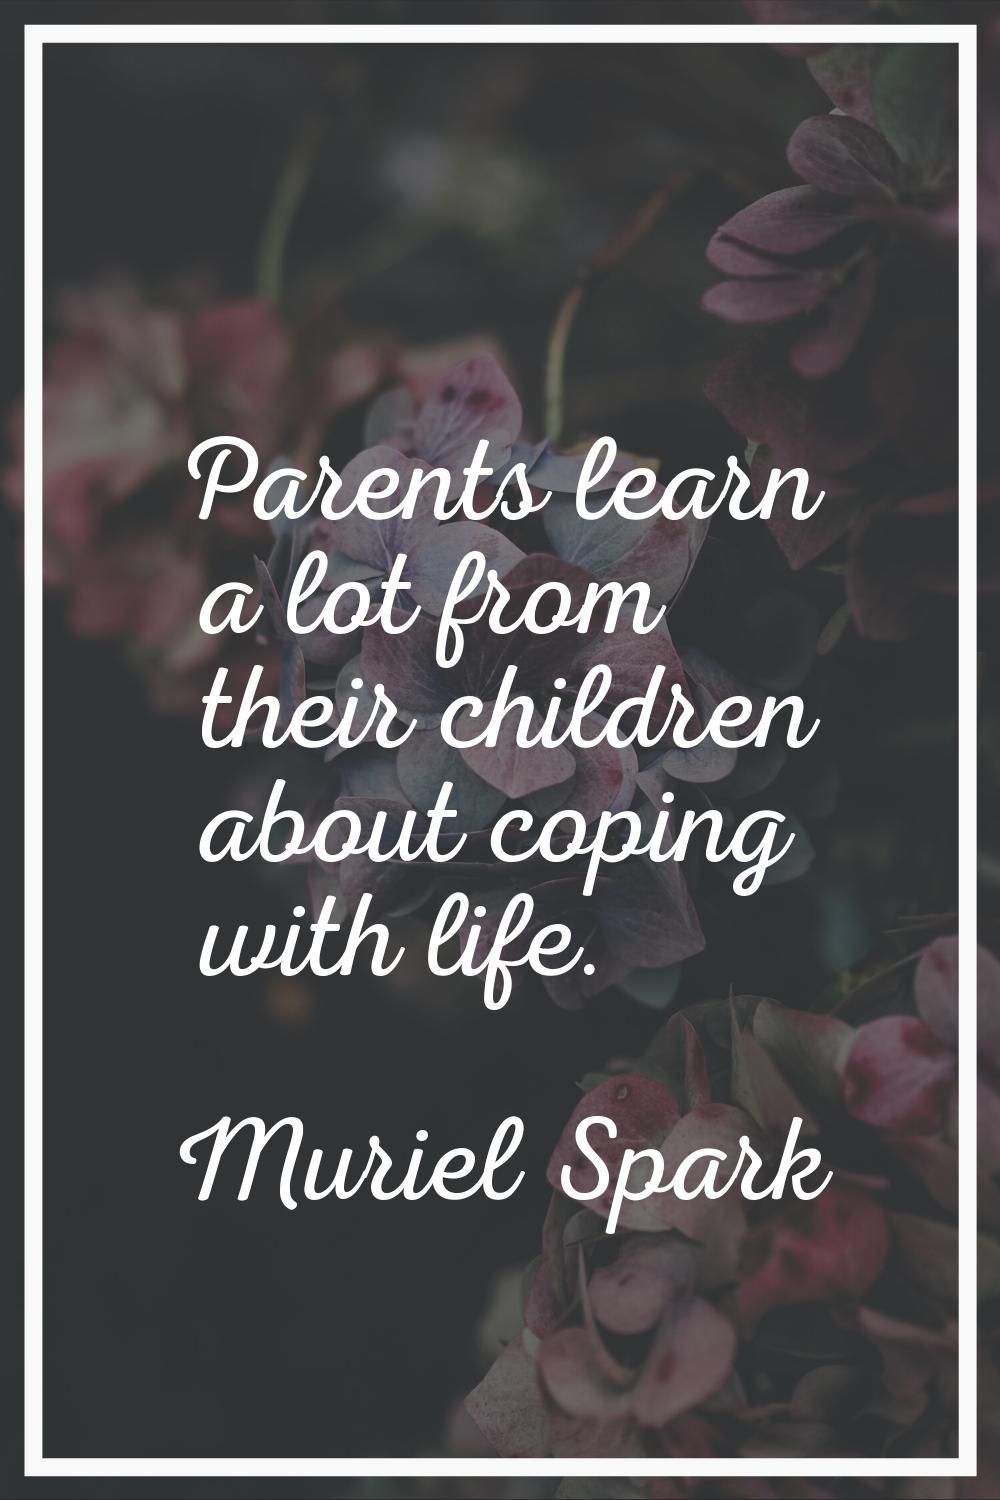 Parents learn a lot from their children about coping with life.